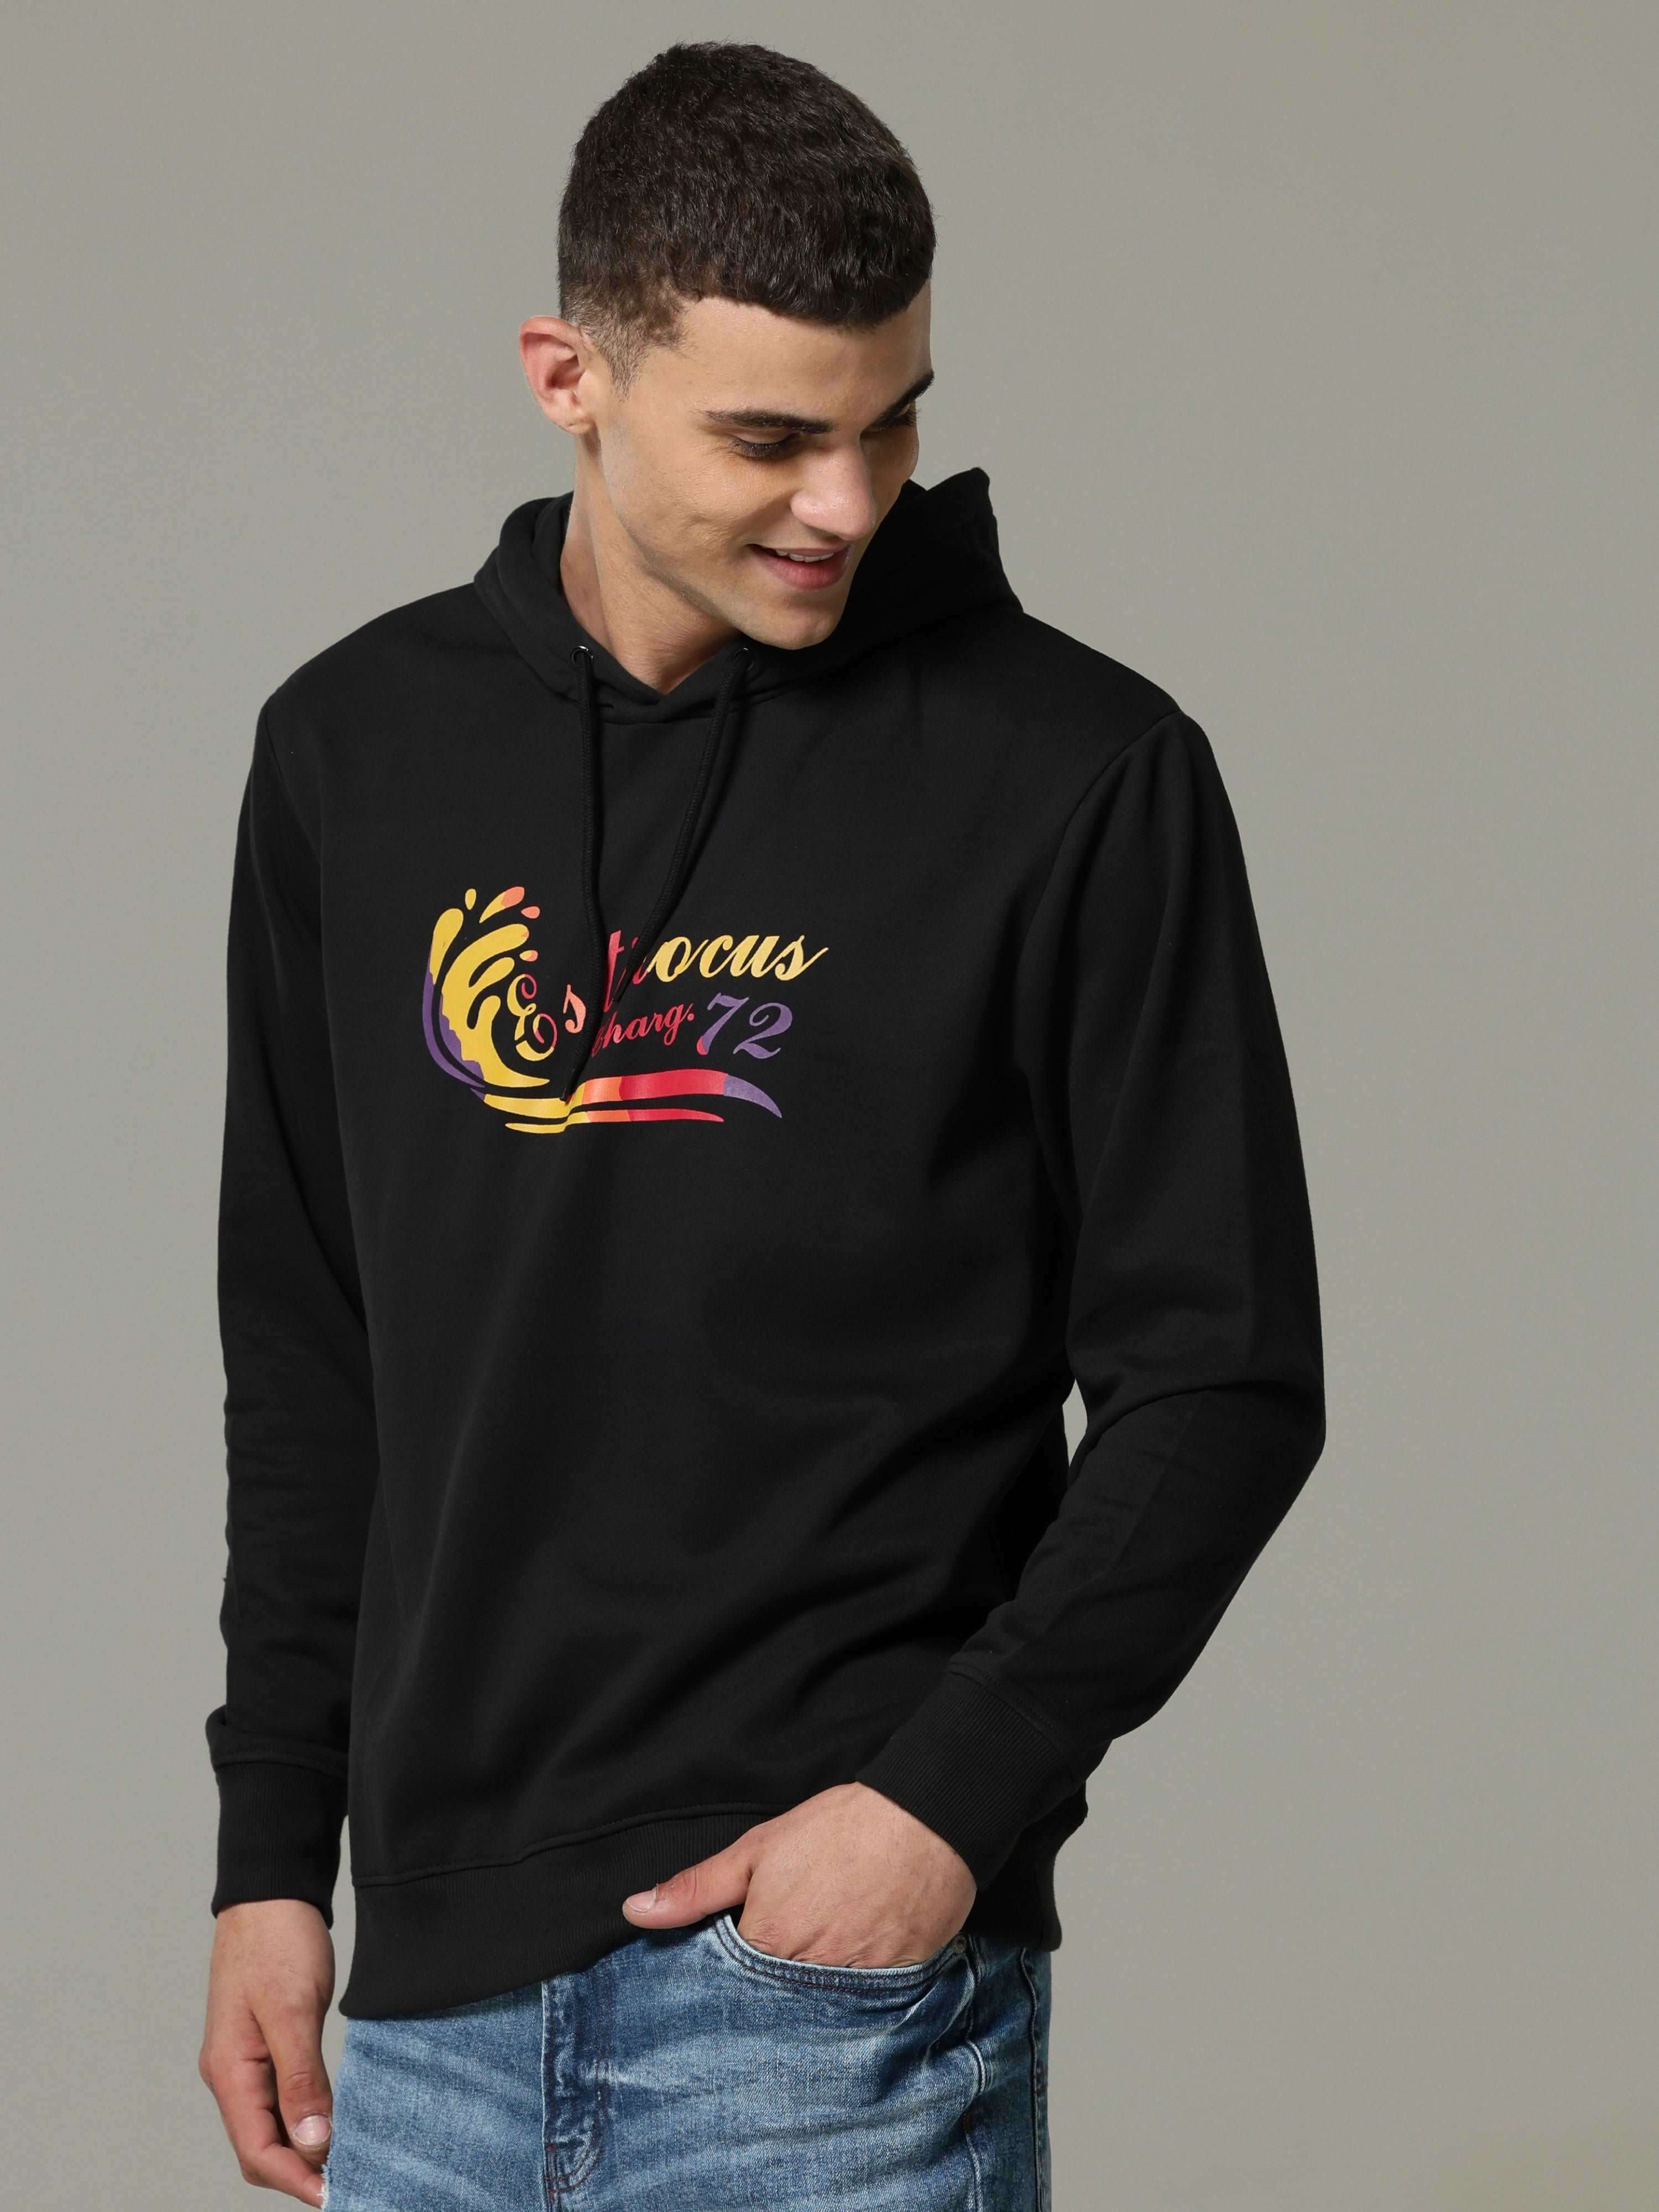 Black Hooded Neck With Drawstring shop online at Estilocus. • Crew neck with an attached hood • Adjustable hood with drawcord •A regular fit with long sleeves •Zipper and pocketless • Dress it up with a pair of Denim or Joggers Fit : Comfort fit Size : Th